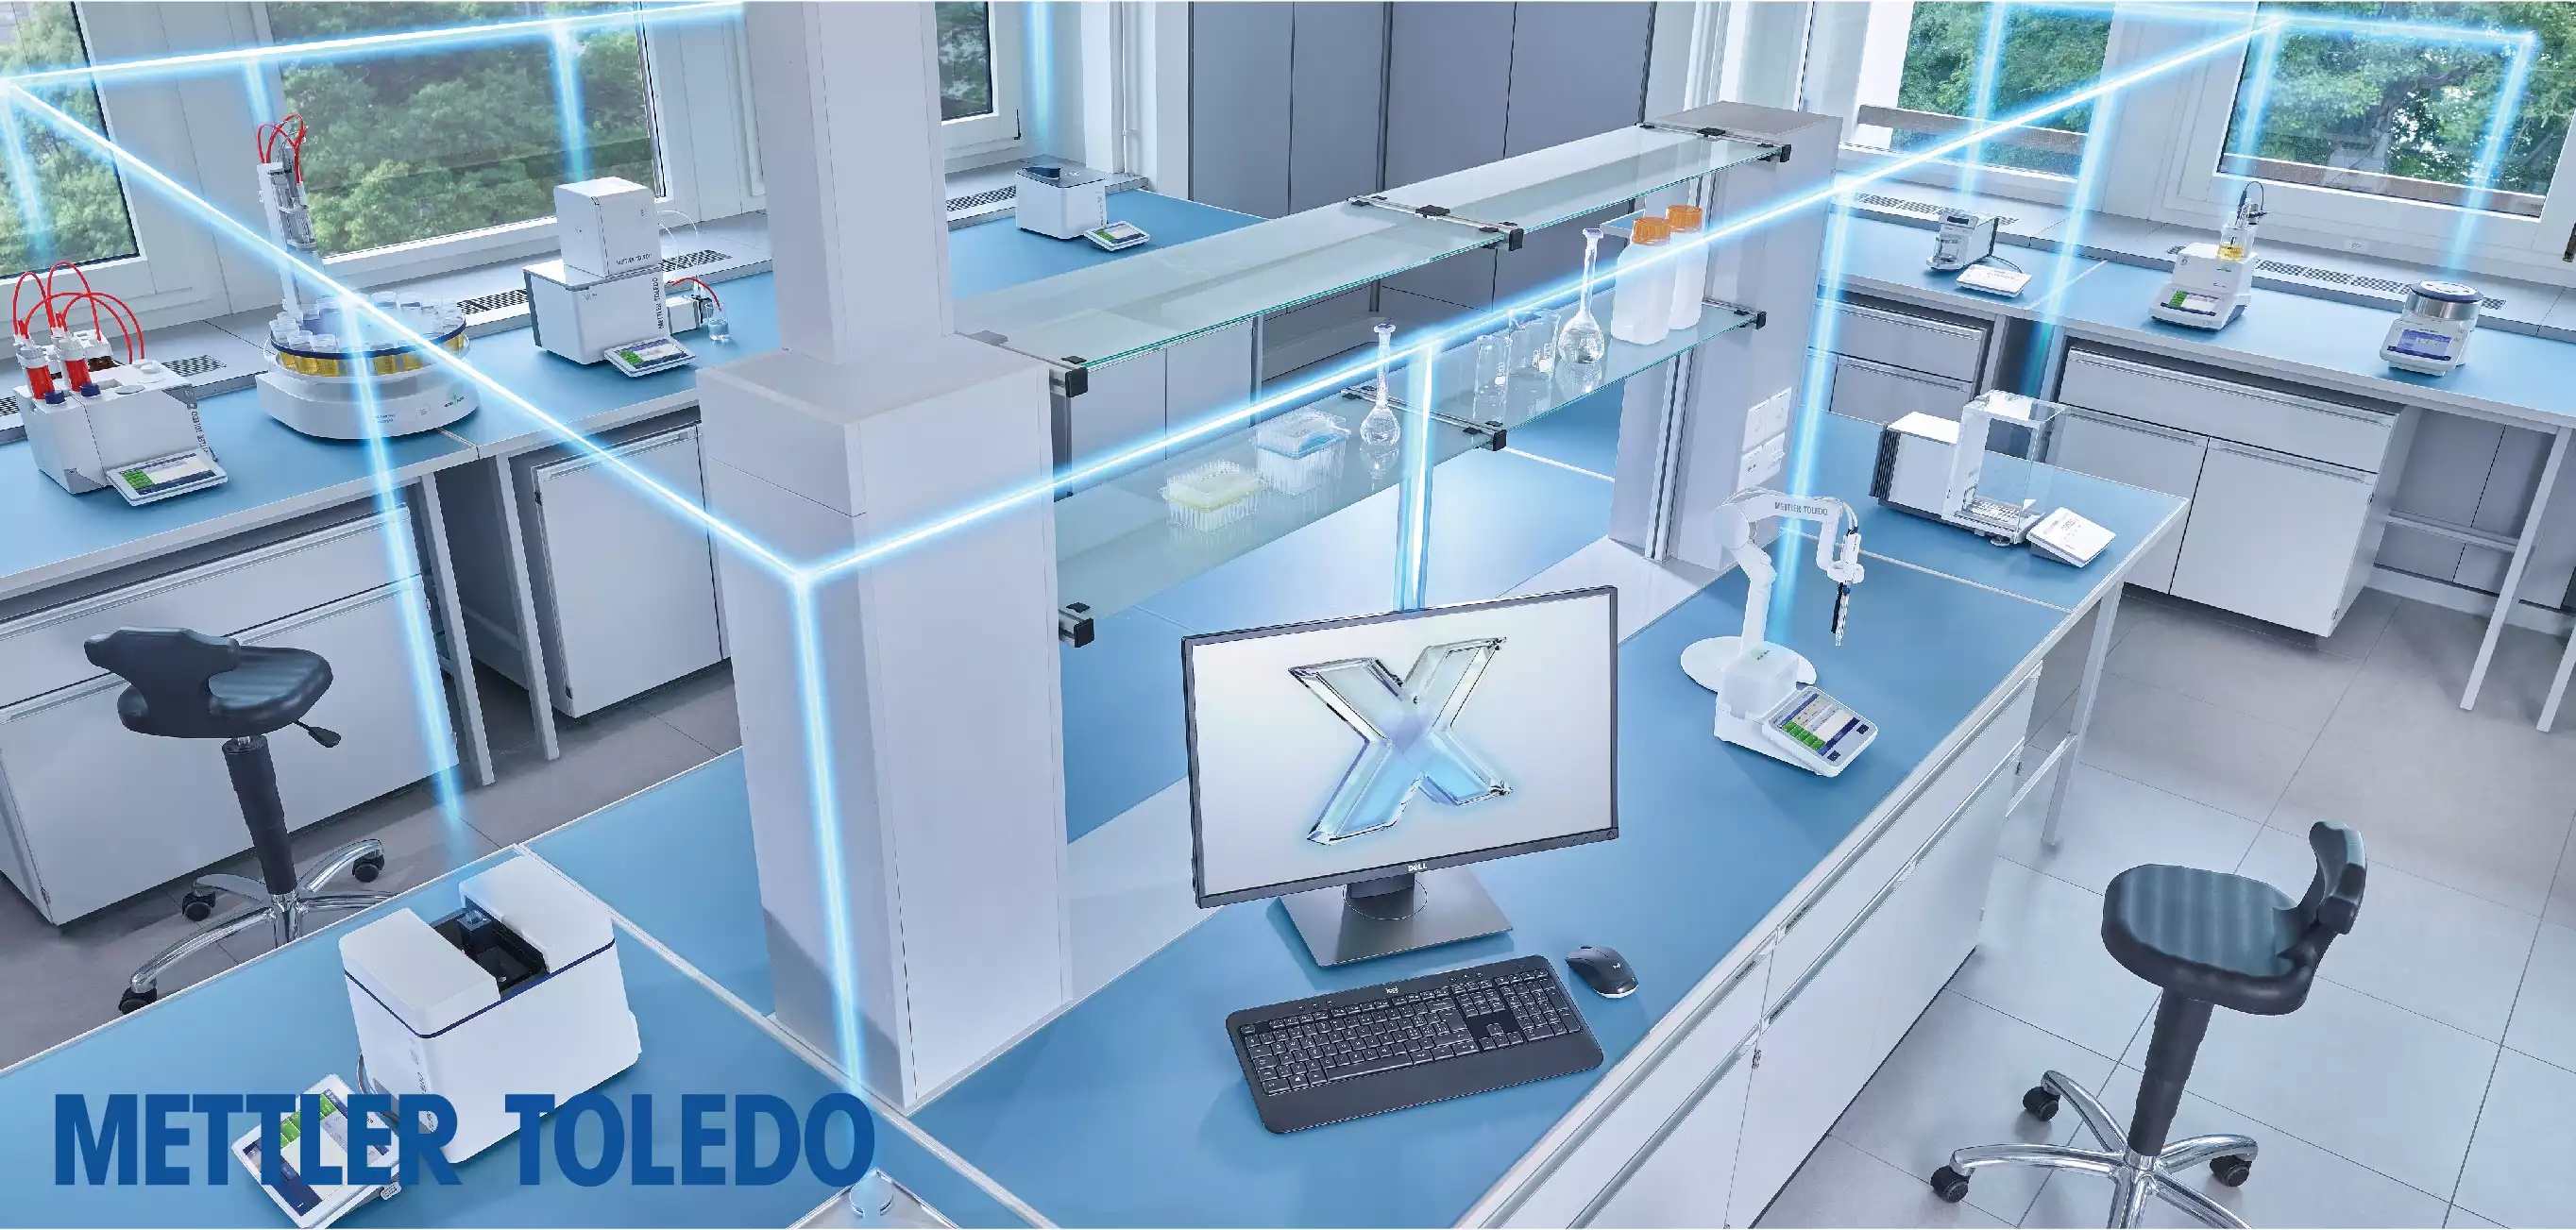 Technical Controls for a Lean Lab By Mettler Toledo.